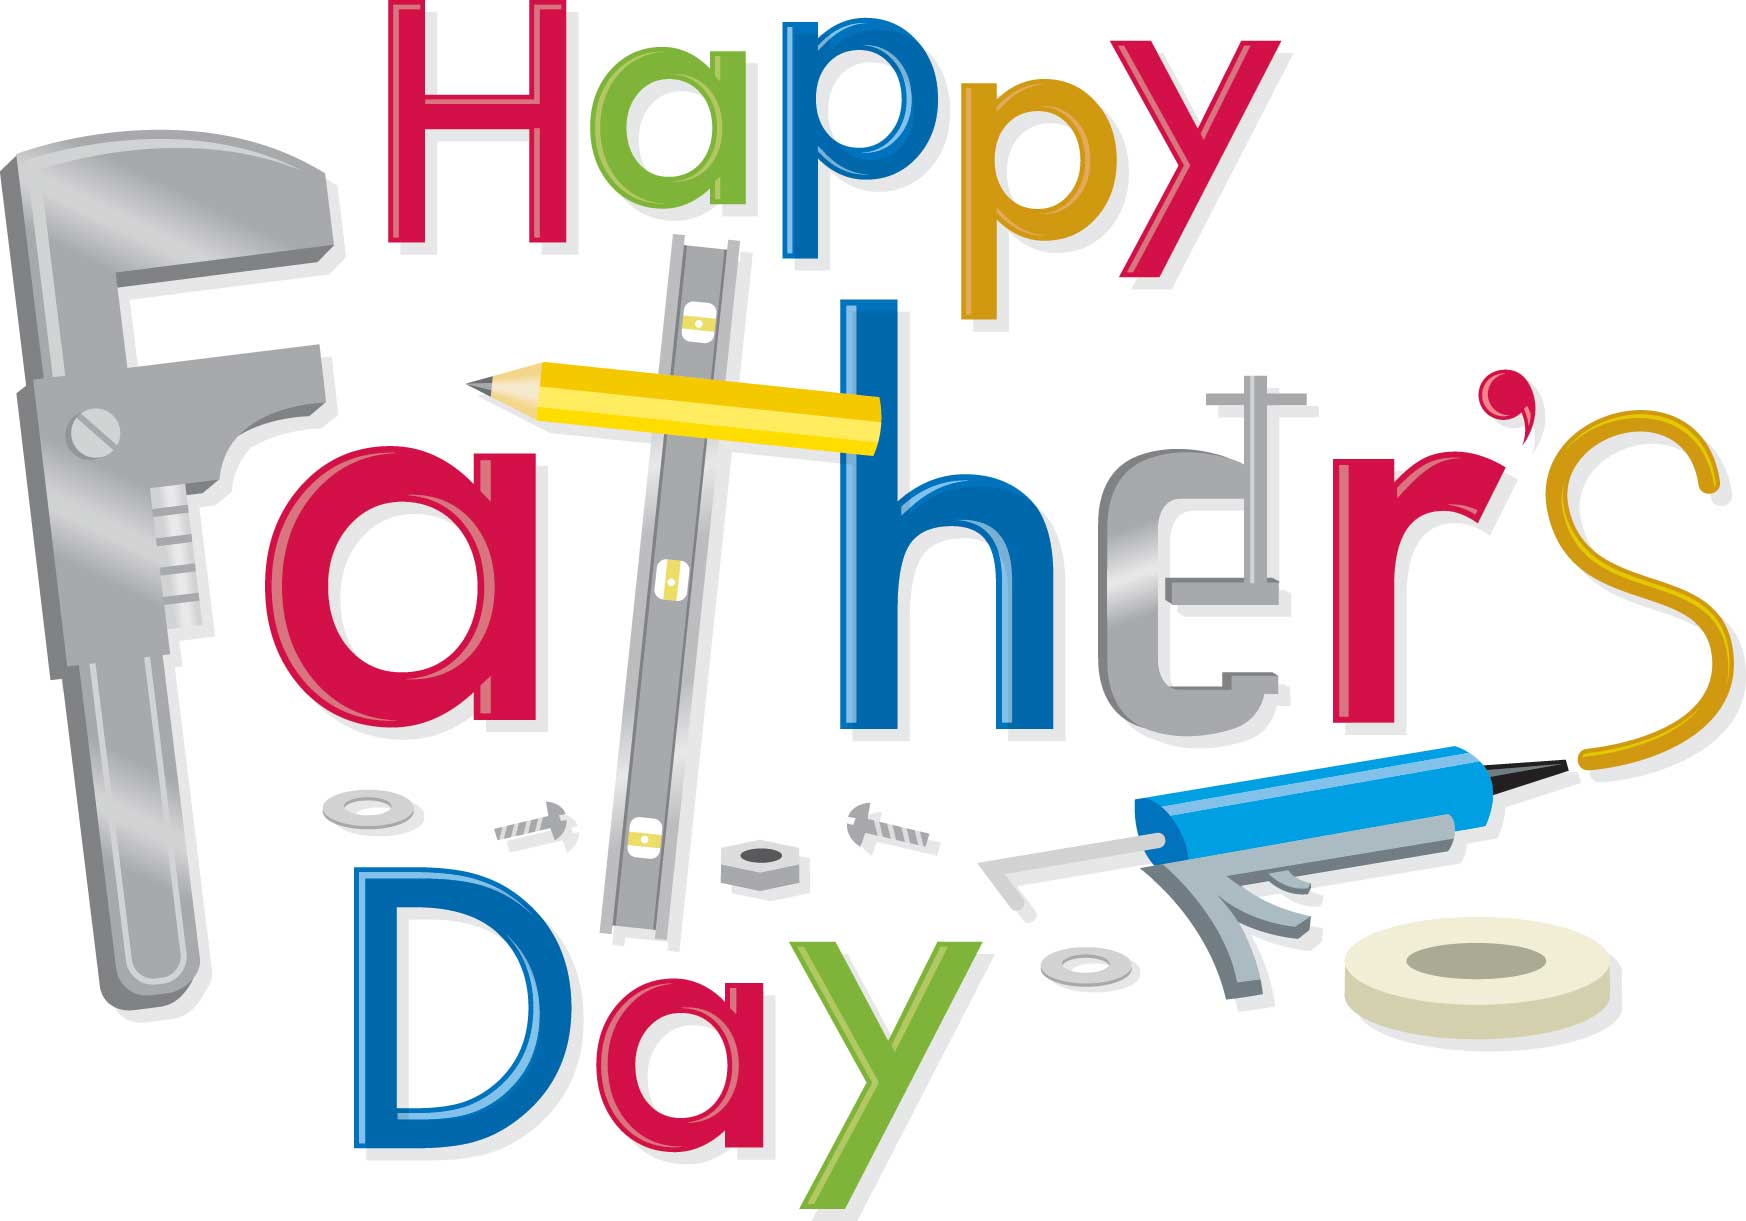 HD desktop wallpaper for Father's Day featuring colorful text and assorted tools like a hammer and screwdriver.